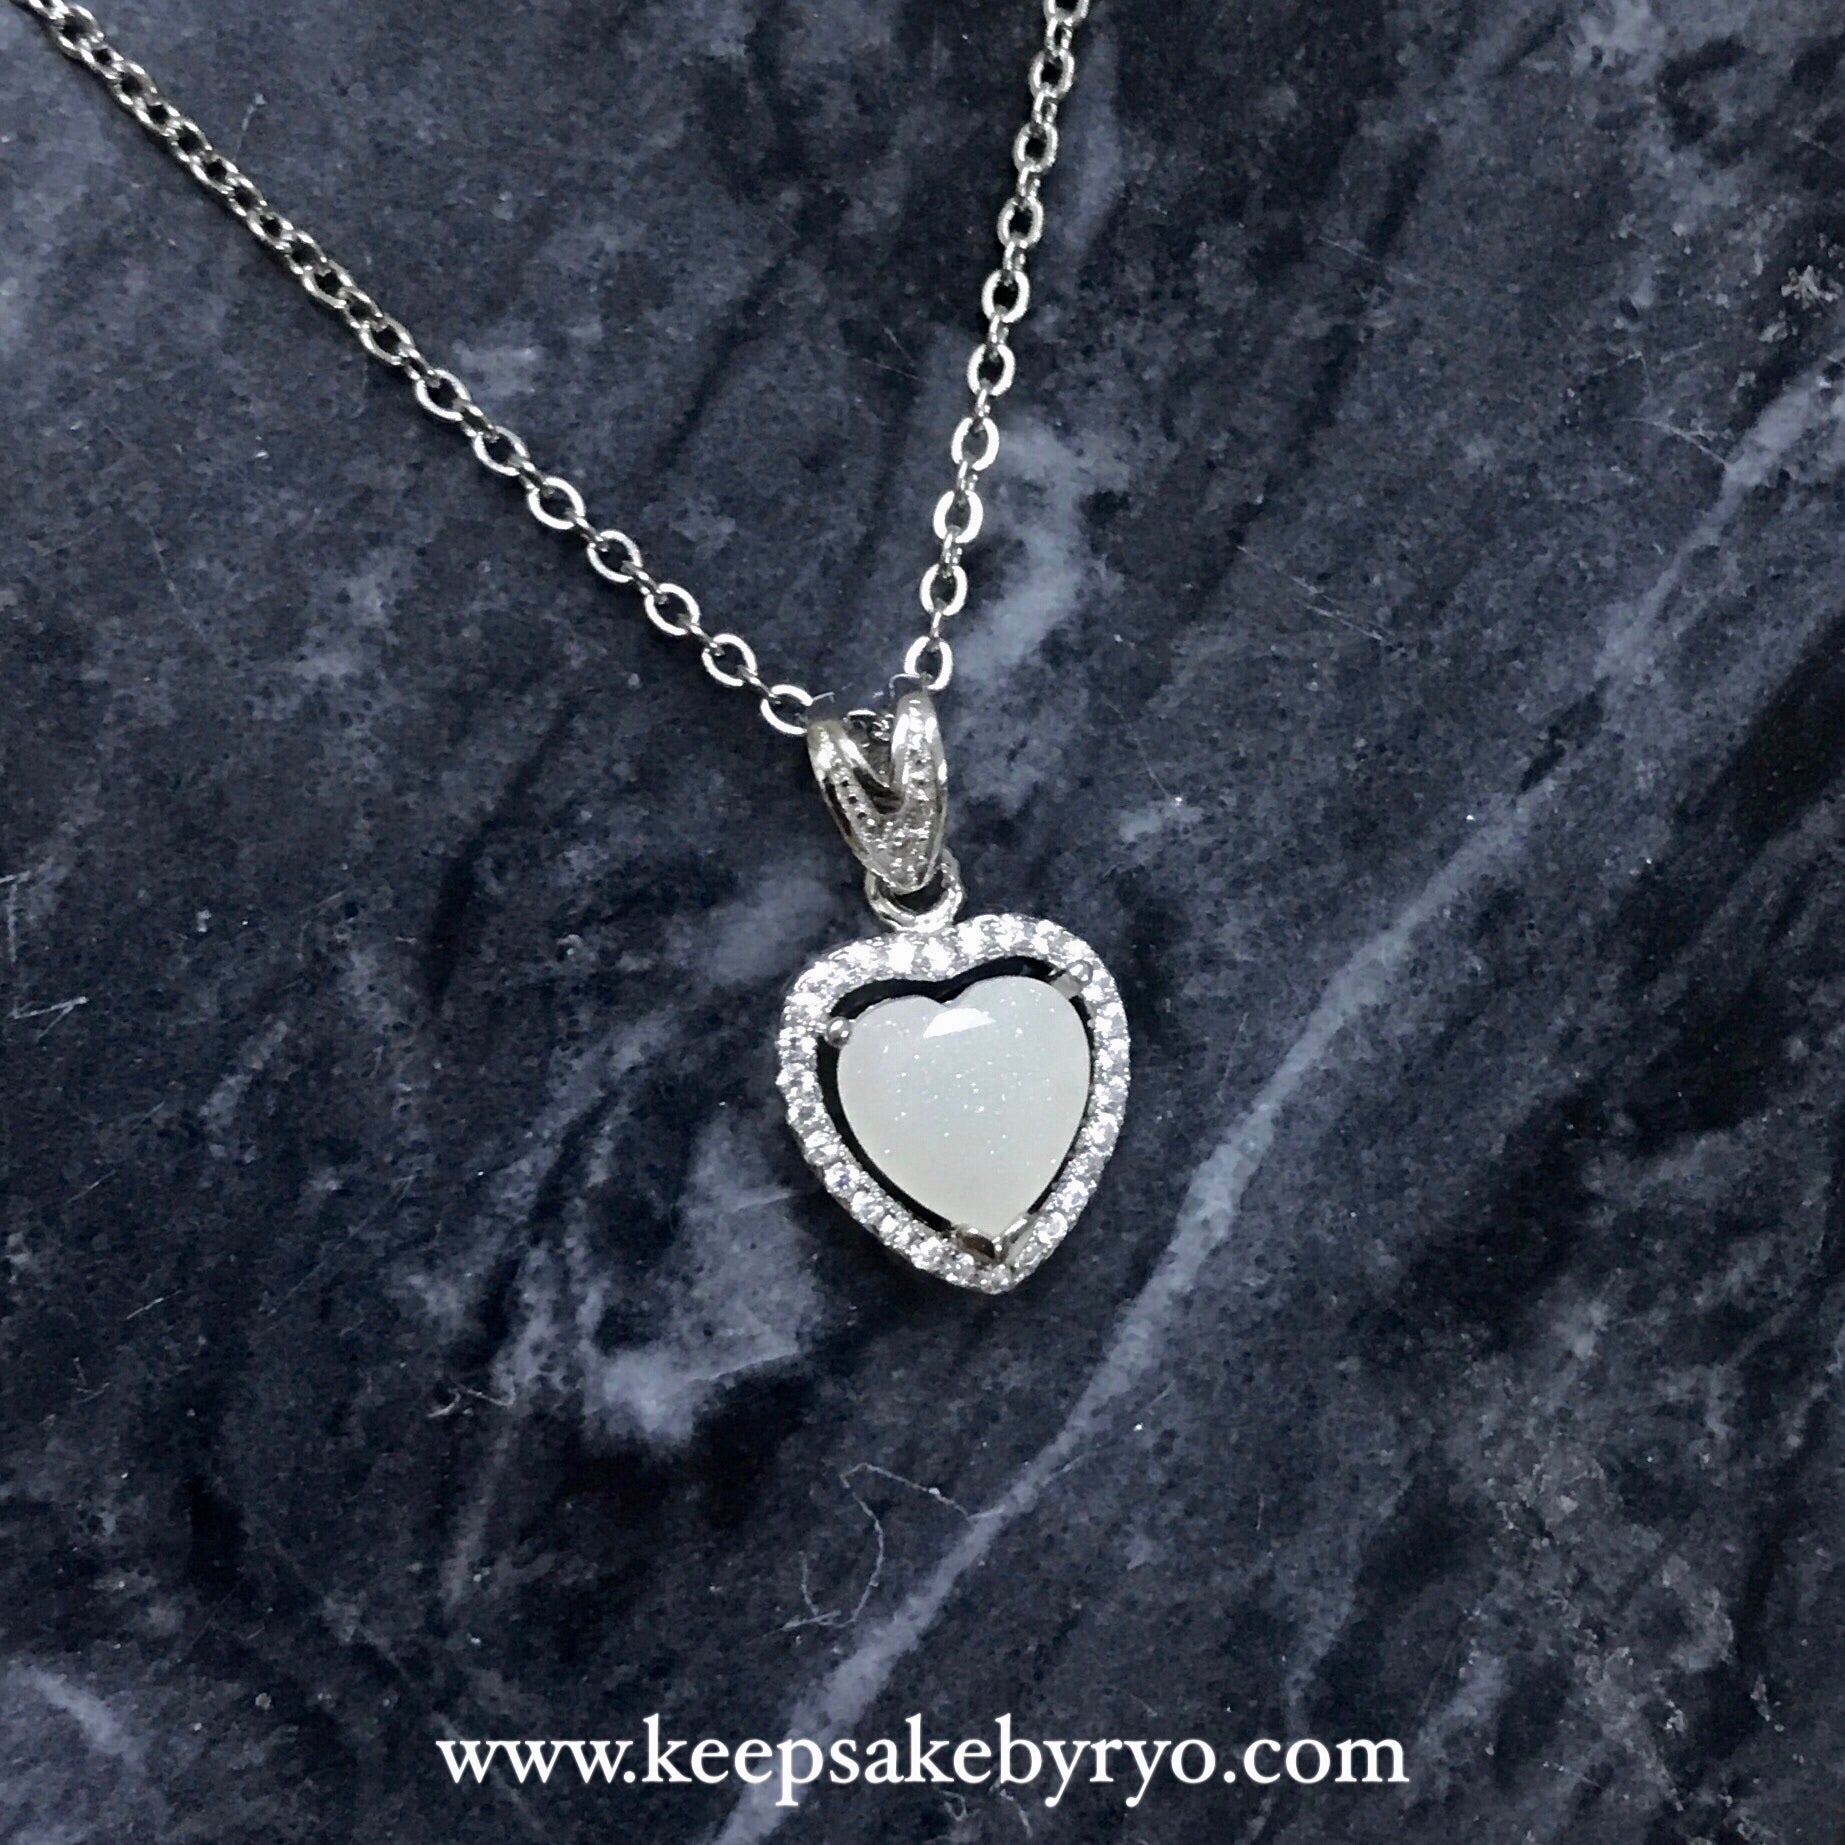 SOLITAIRE: GEMMA PAVE HEART PENDANT WITH HEART SHAPED INCLUSION STONE